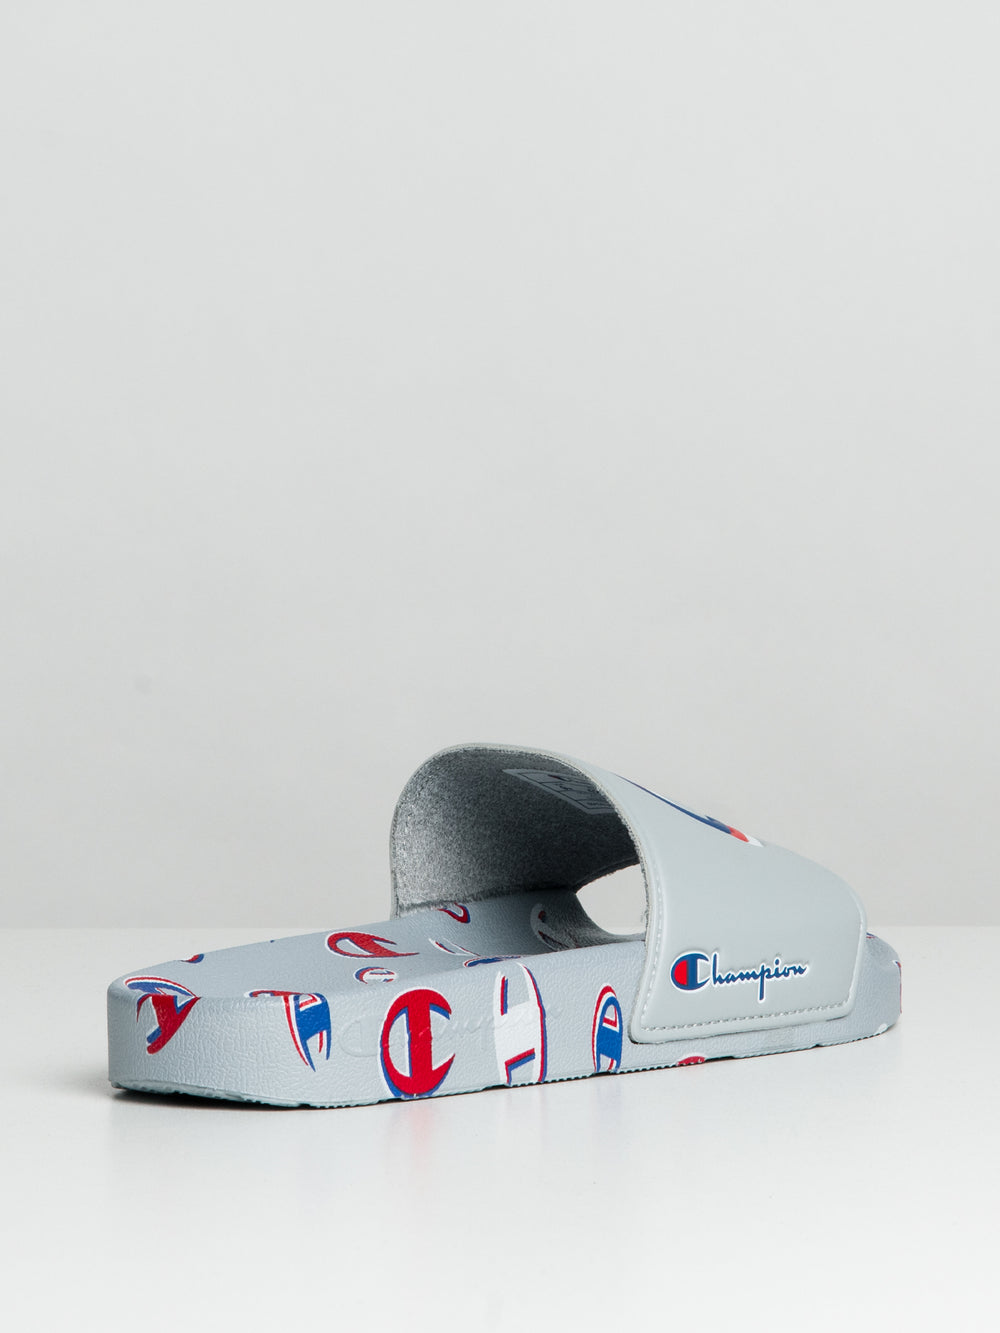 MENS CHAMPION IPO 3PEAT SLIDES - CLEARANCE